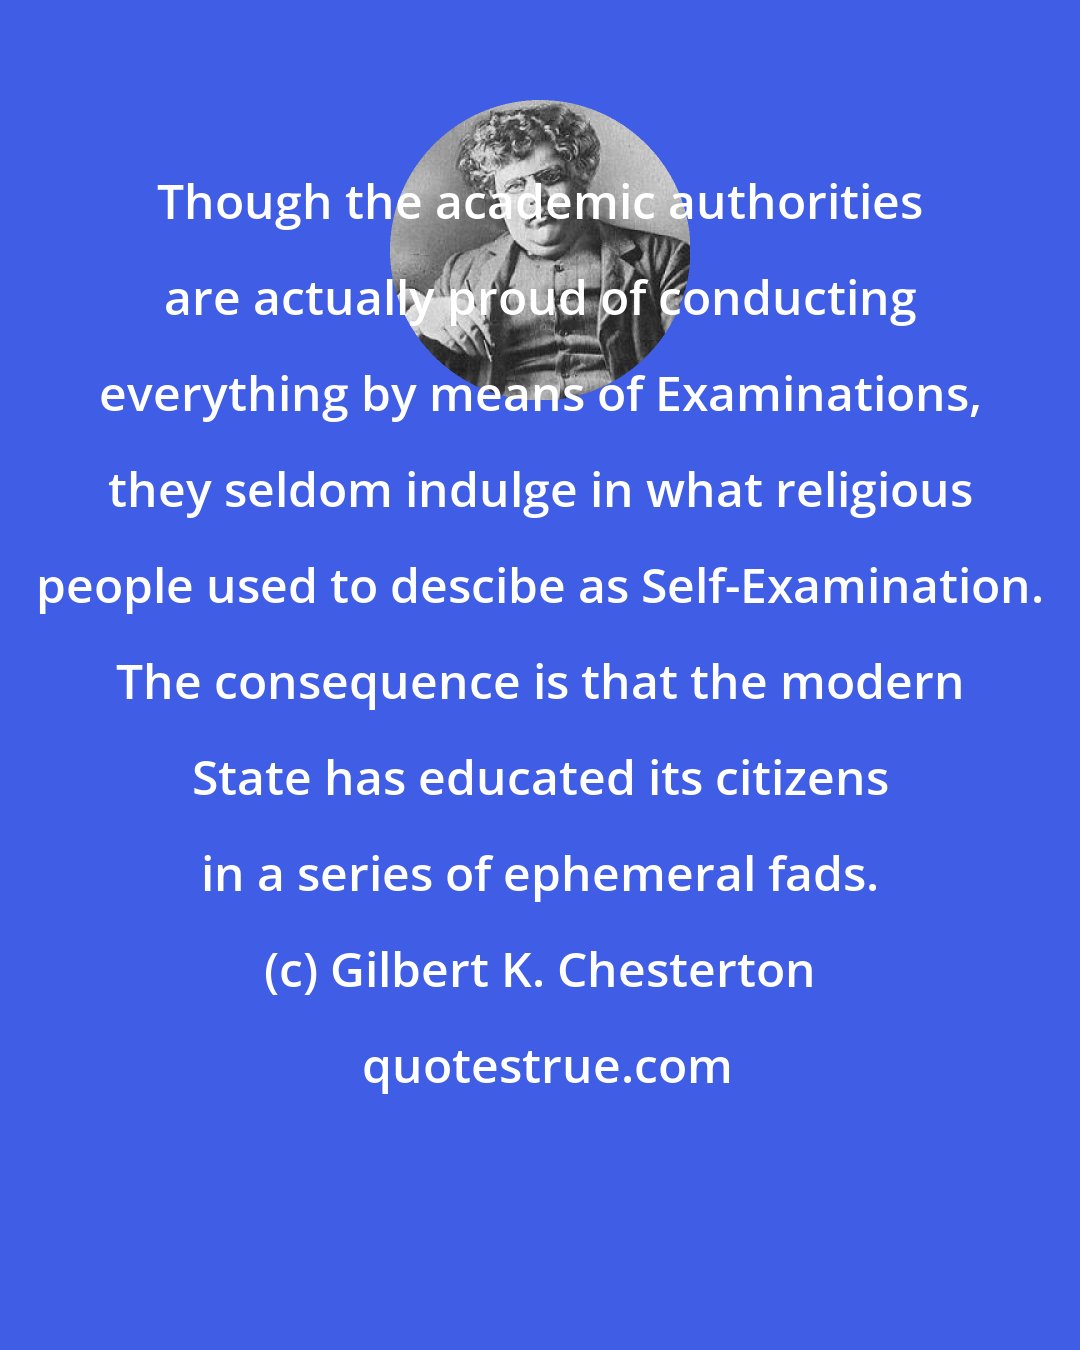 Gilbert K. Chesterton: Though the academic authorities are actually proud of conducting everything by means of Examinations, they seldom indulge in what religious people used to descibe as Self-Examination. The consequence is that the modern State has educated its citizens in a series of ephemeral fads.